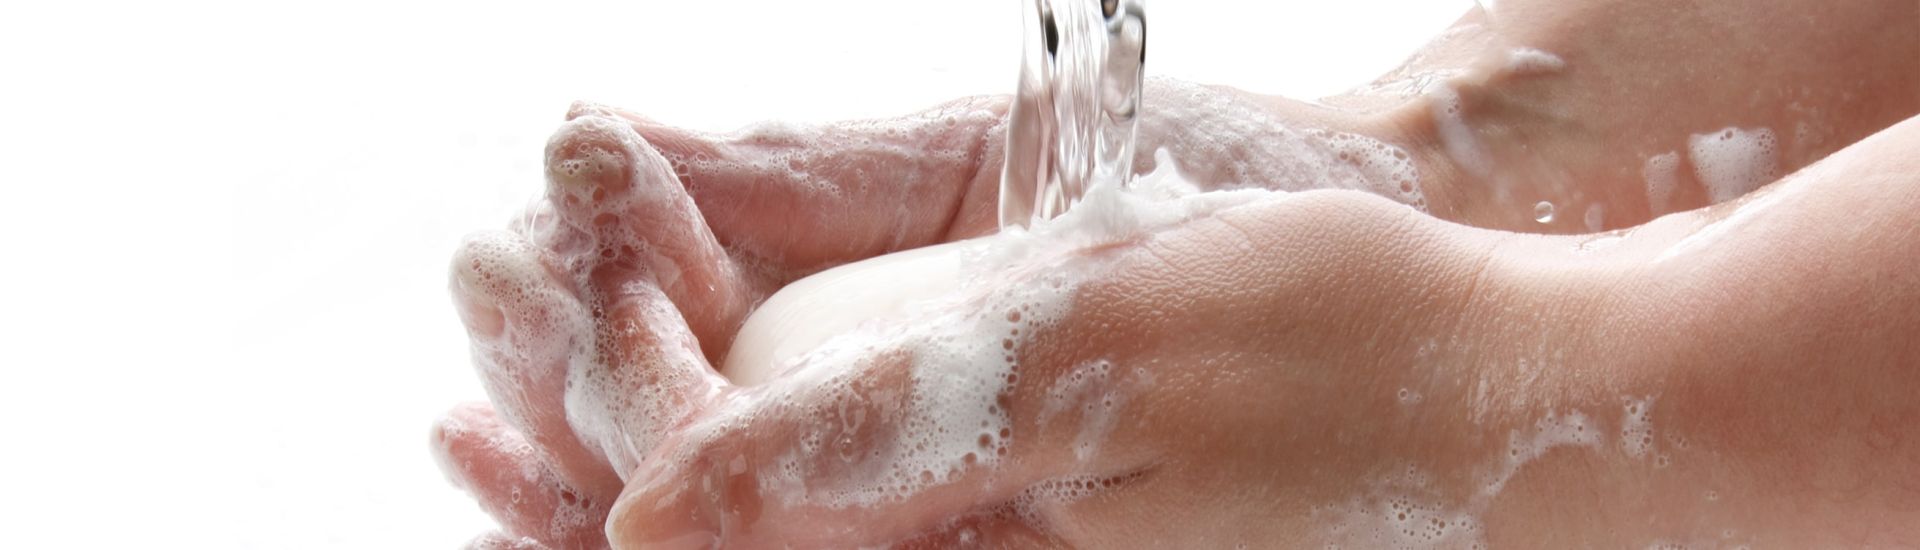 water running into soap in hands